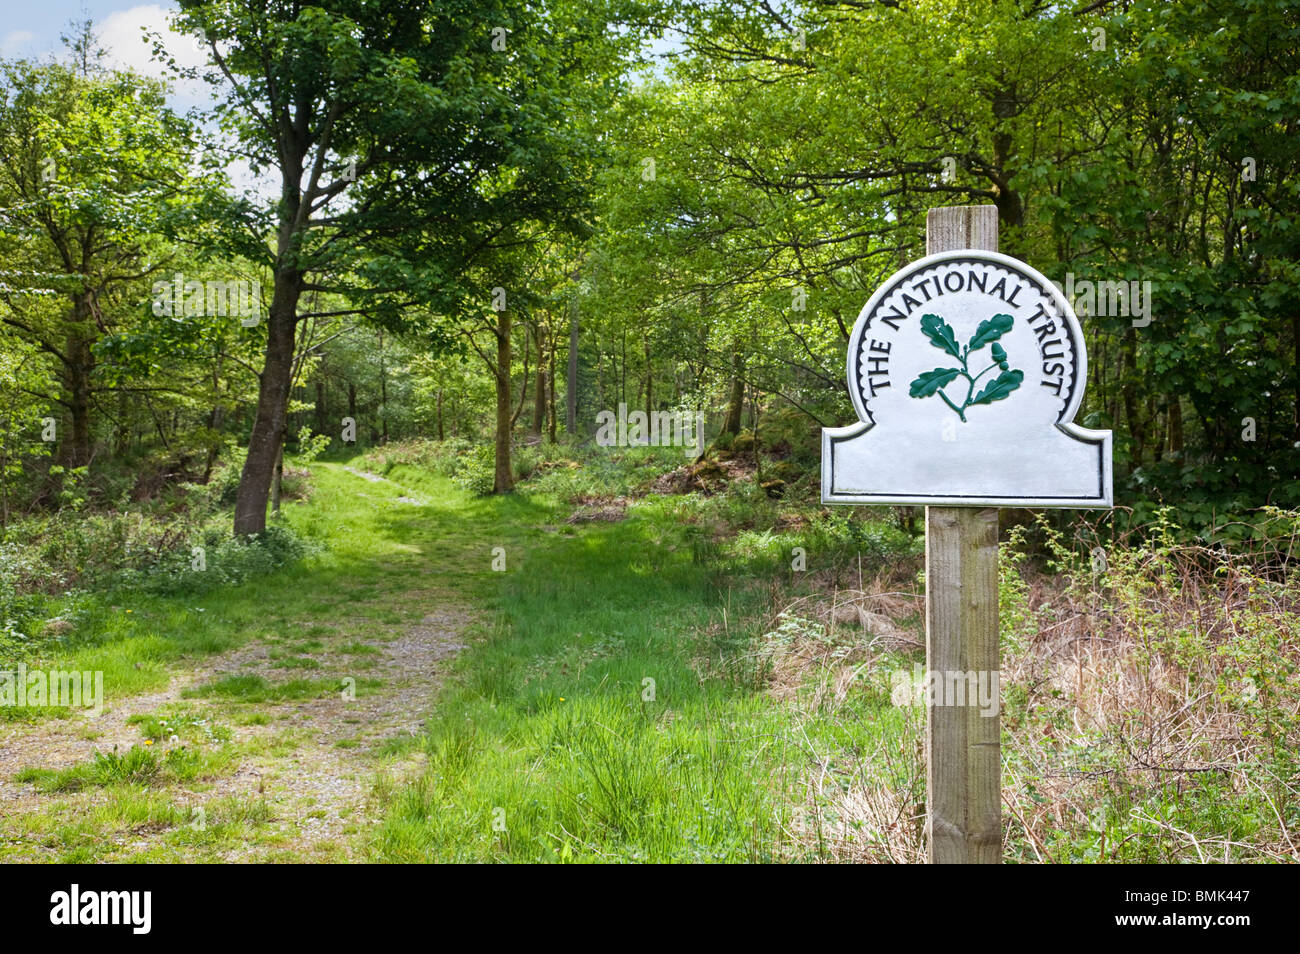 National Trust signpost England UK at the entrance to a woodland path Stock Photo